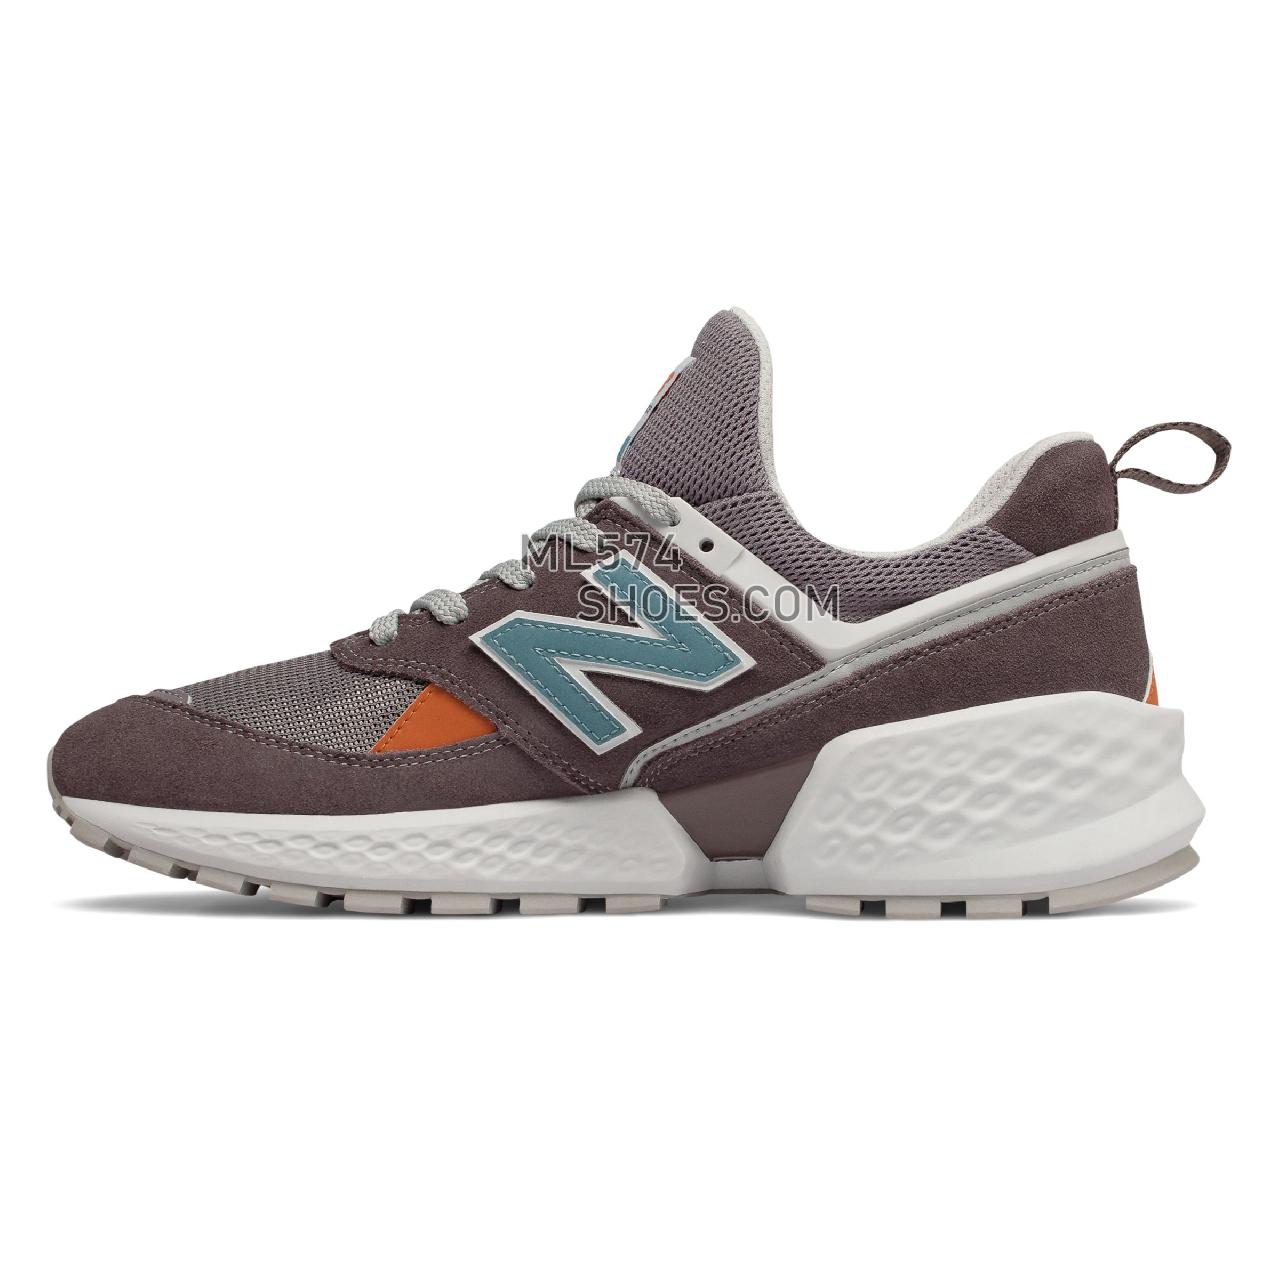 New Balance 574 Sport - Men's Sport Style Sneakers - Light Shale with White - MS574GND